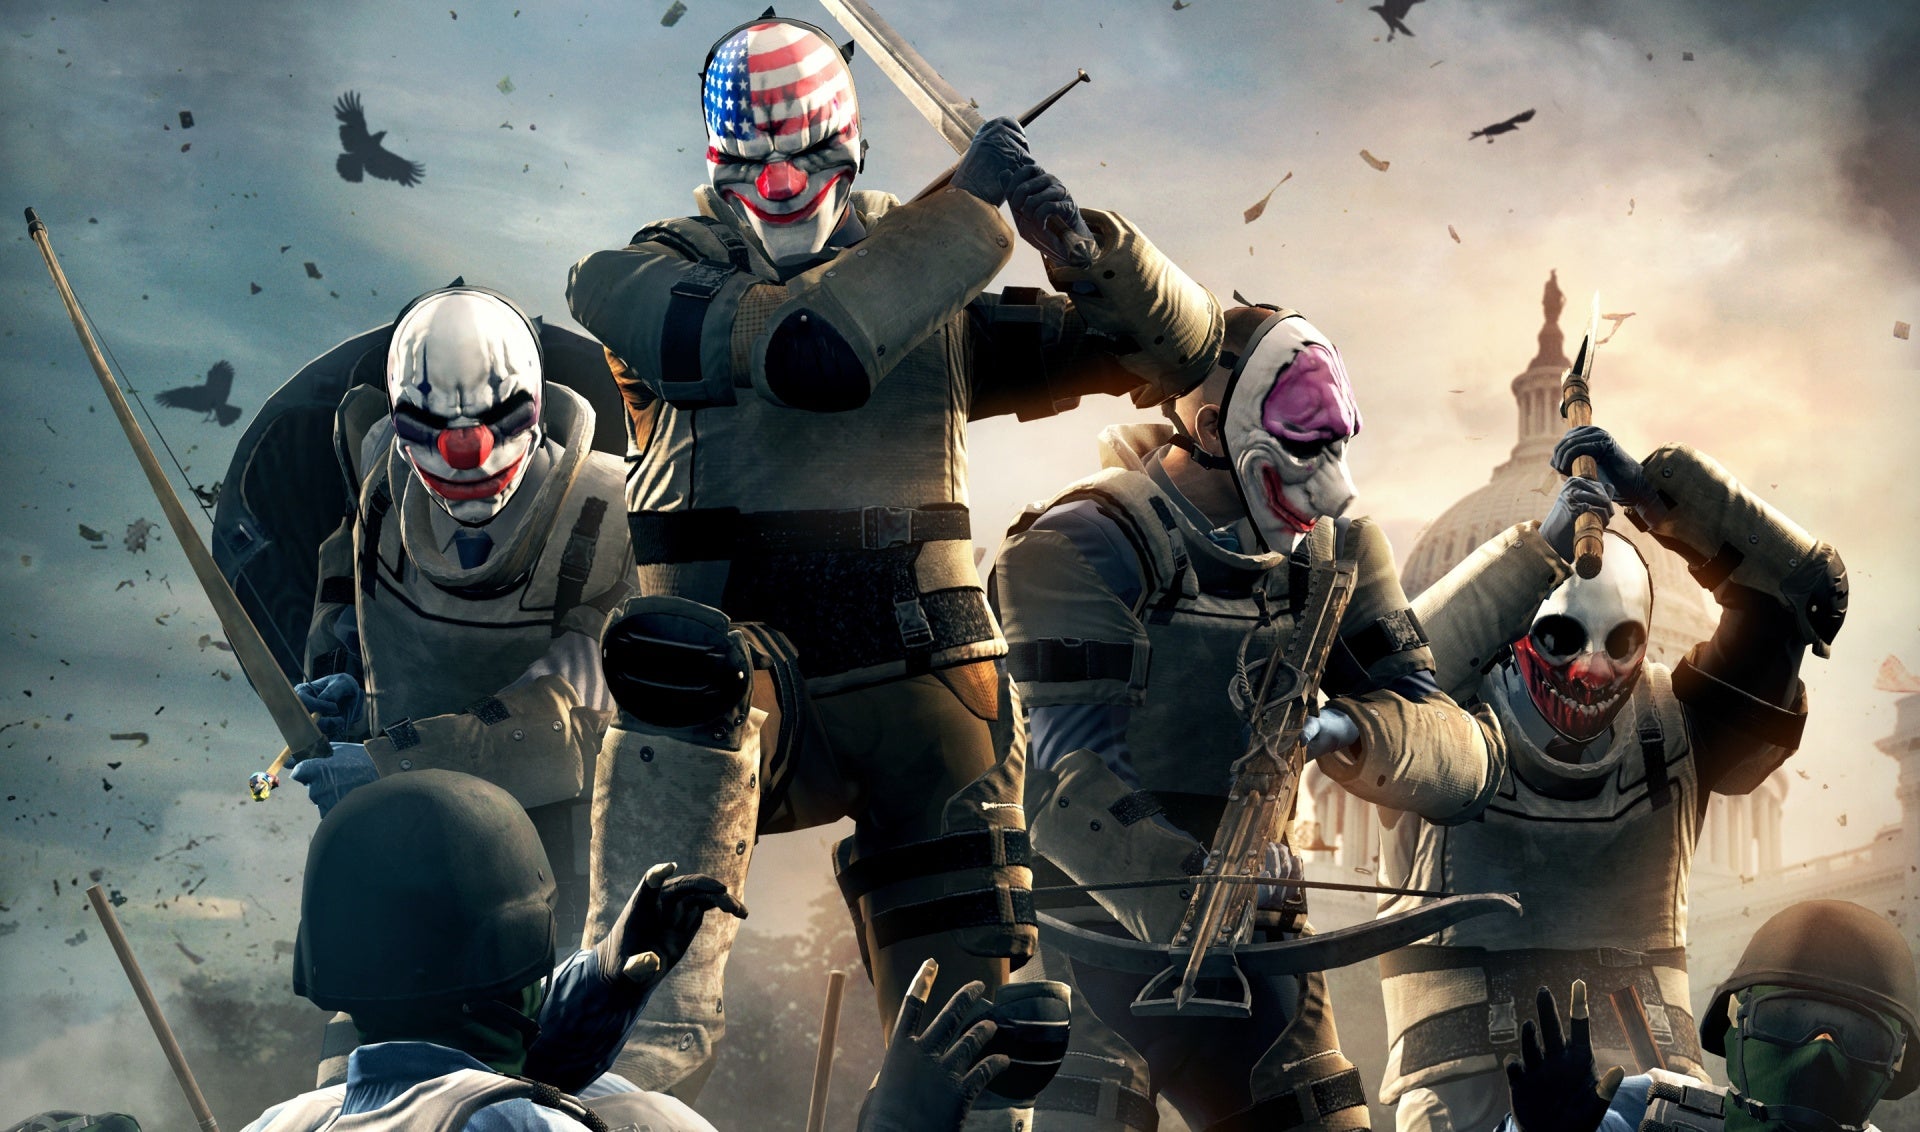 Image for Starbreeze seeks $26m to fund ongoing development of Payday 3